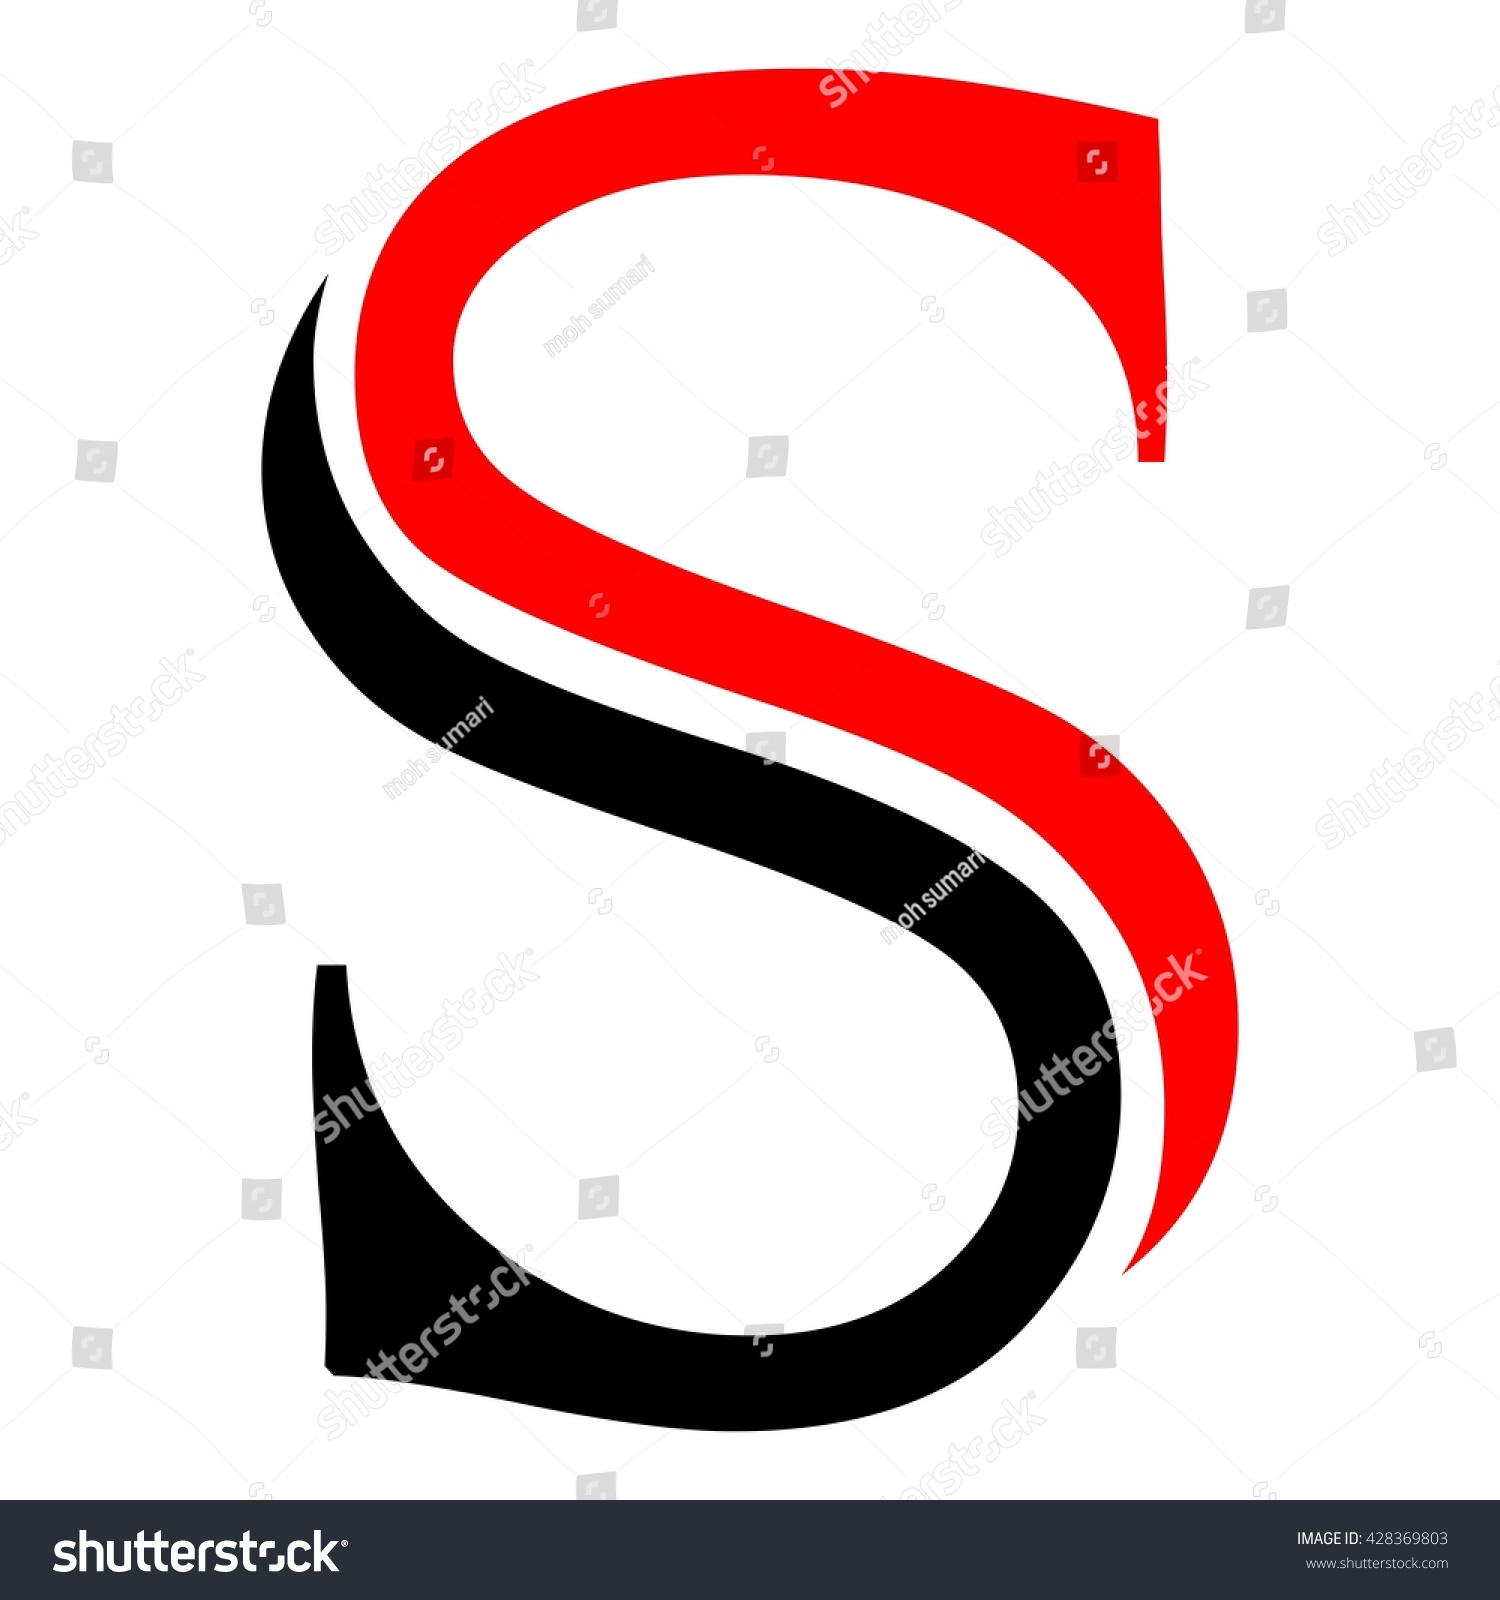 Ss Modification Stock Vector (Royalty Free) 428369803 | Shutterstock